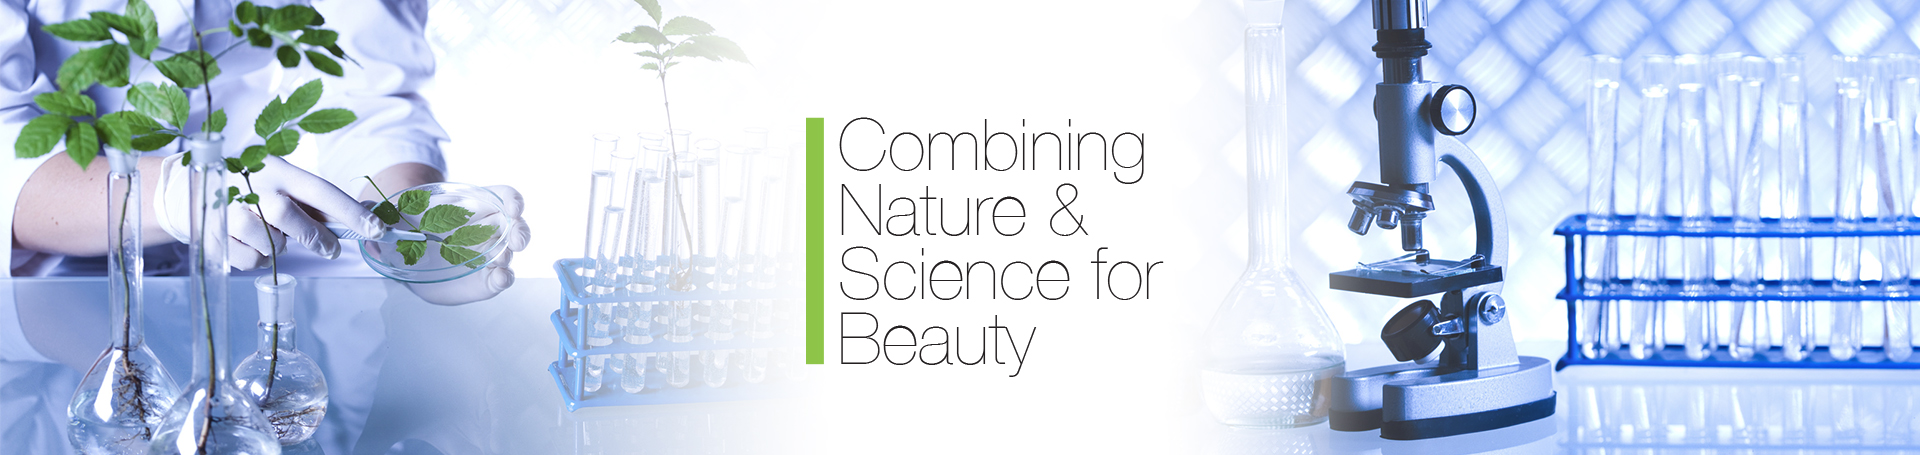 Combining Nature & Science for Beauty